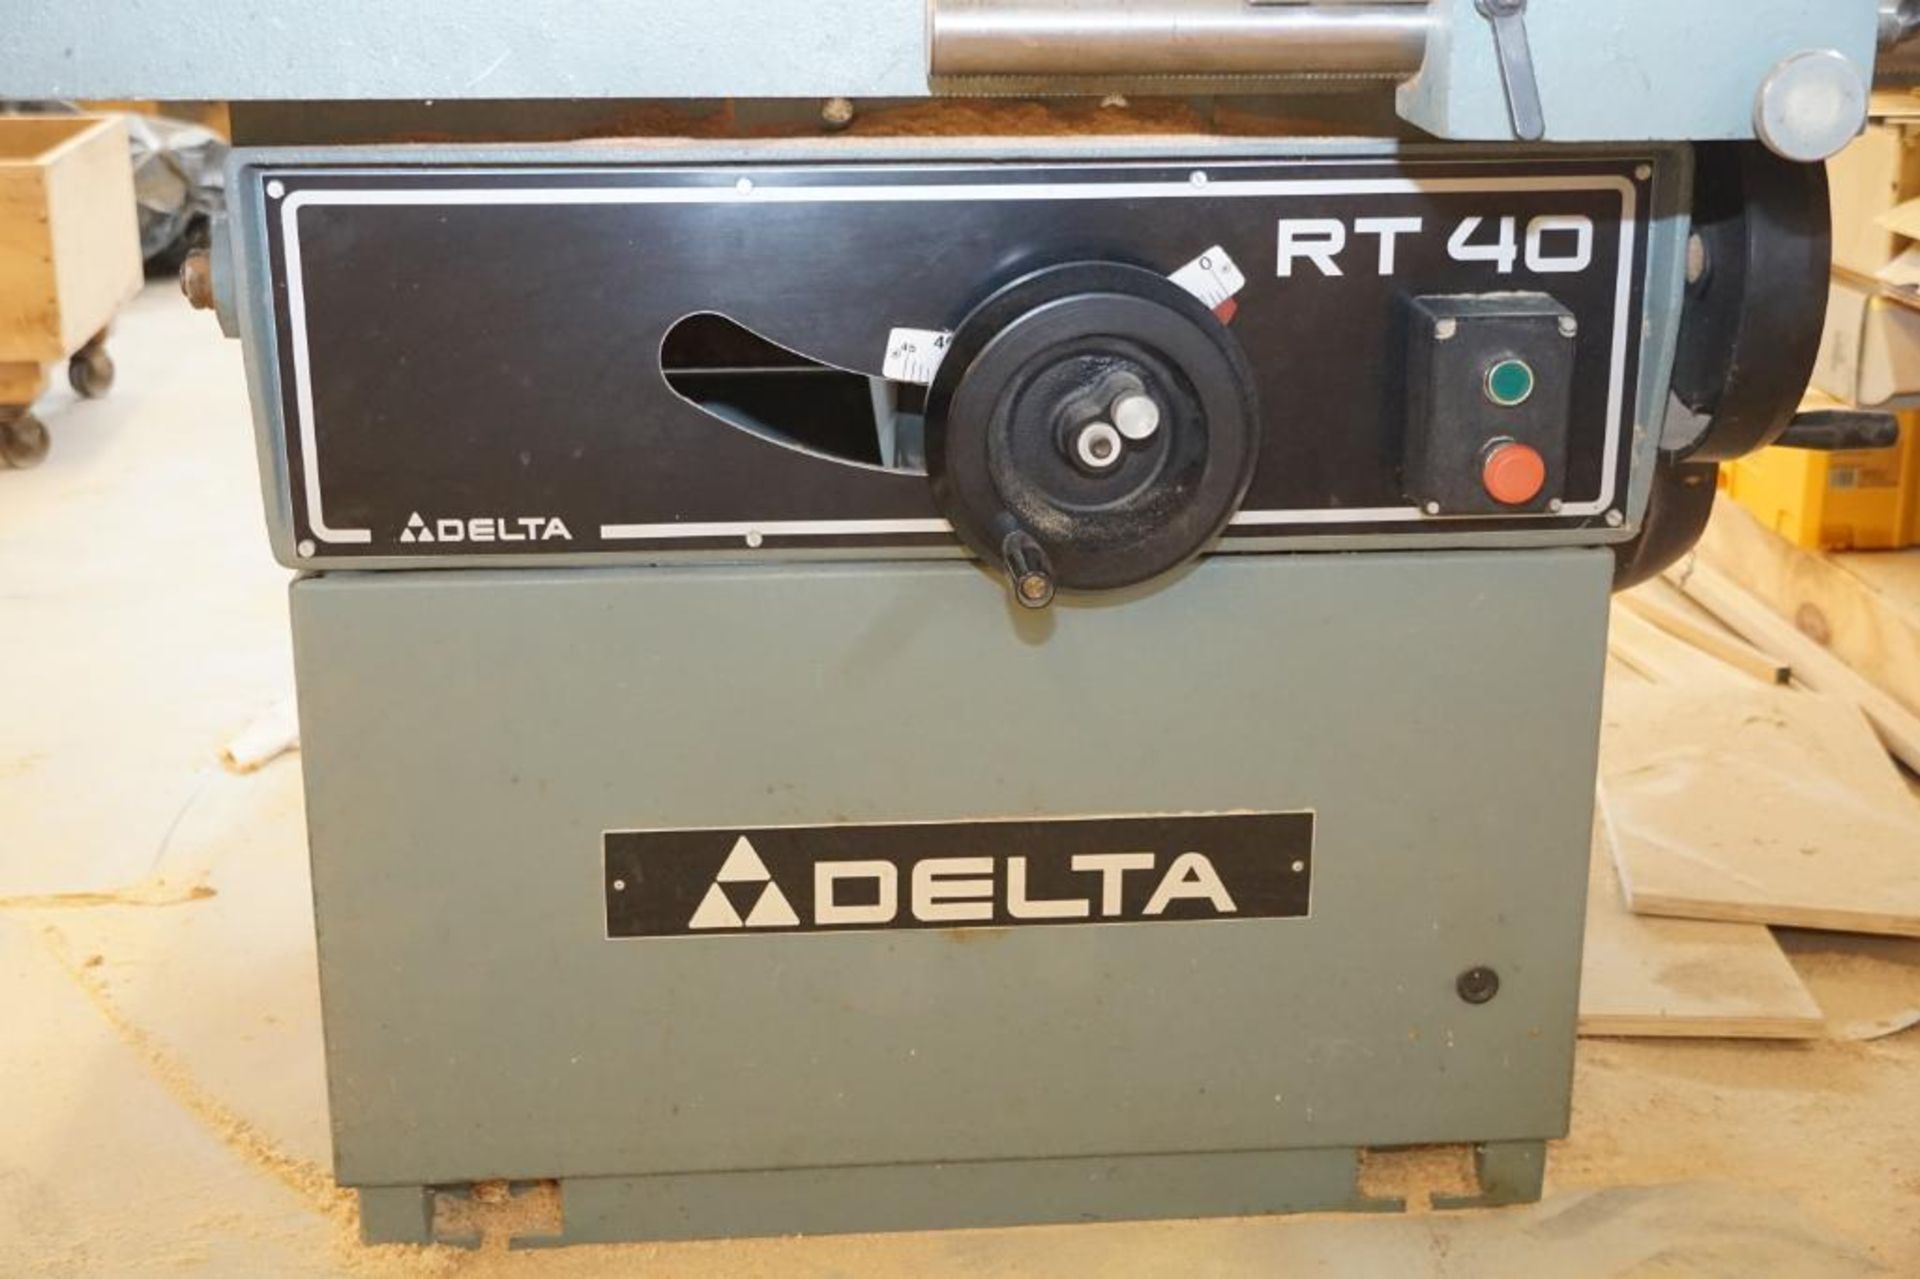 Delta RT40 14 in. Tilting Arbor Saw - Image 5 of 11